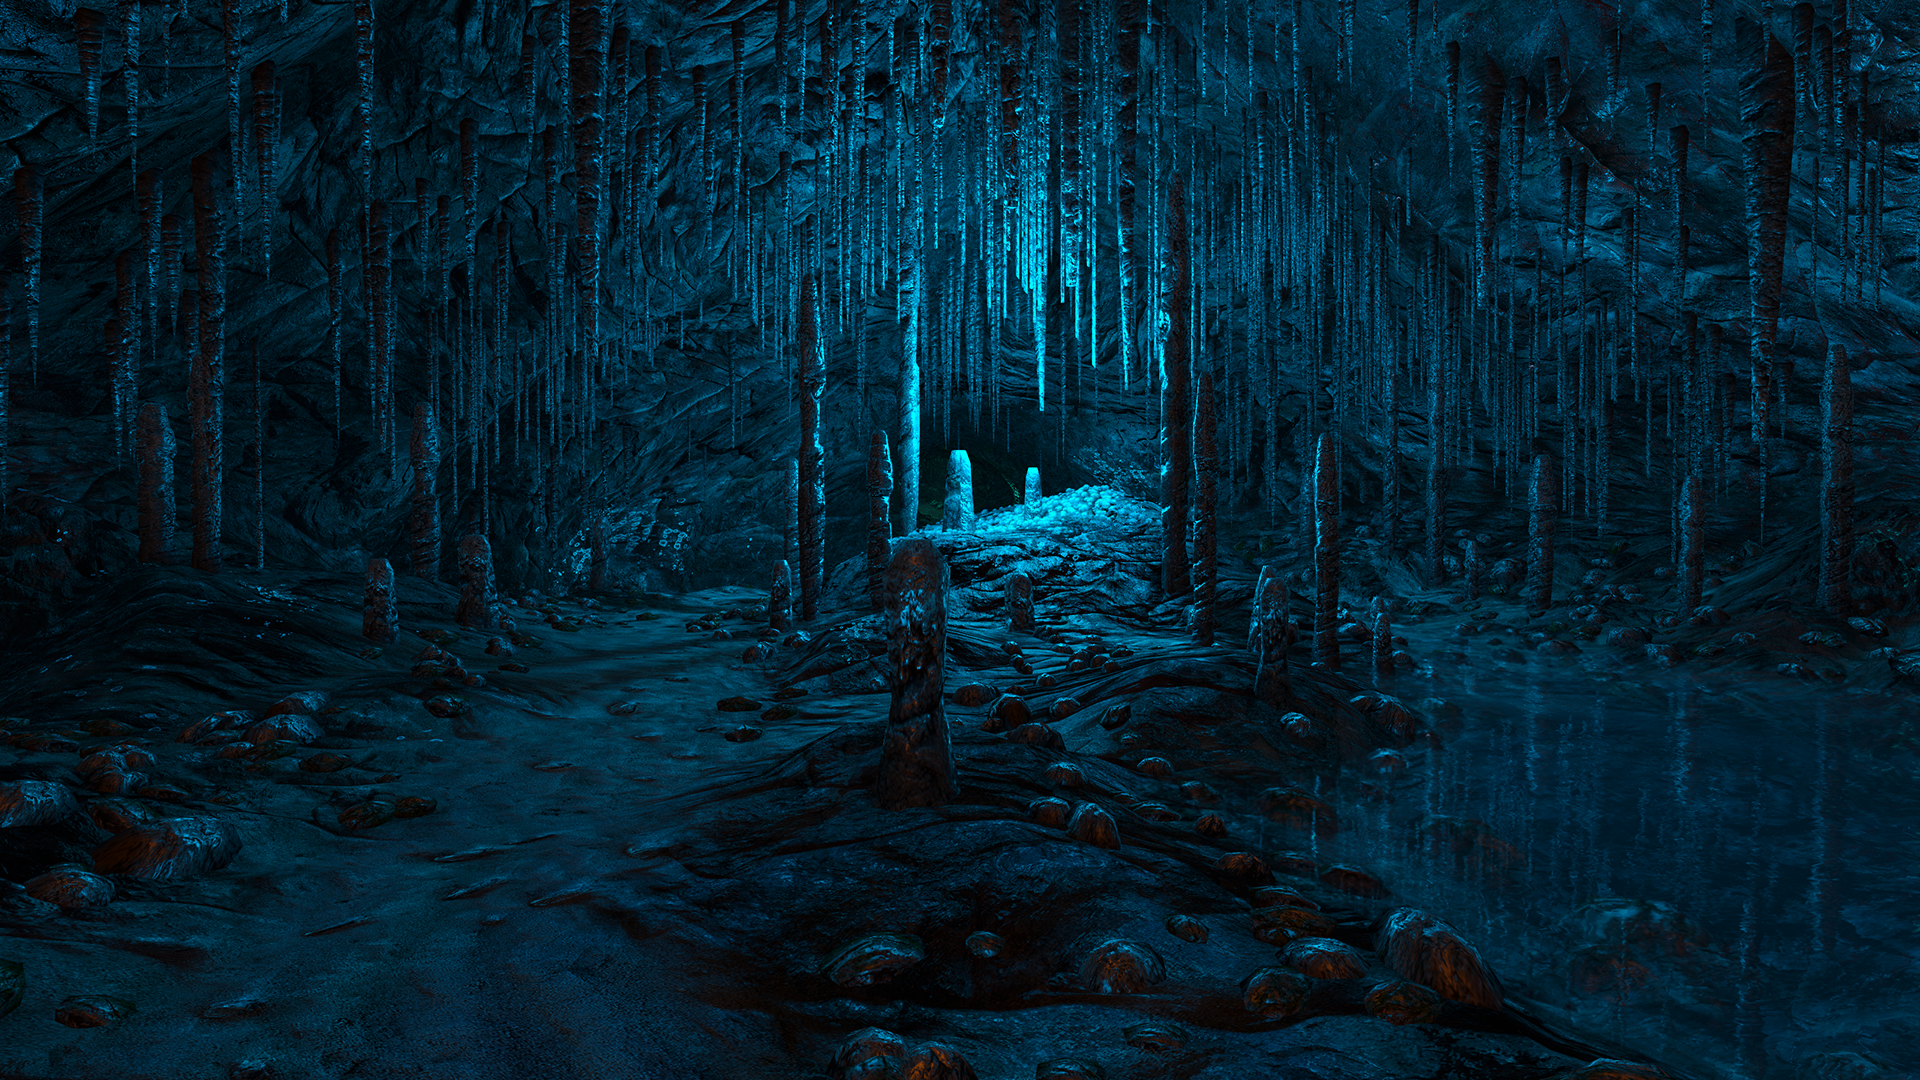 dear, Esther, Video, Games, Nature, Landscapes, Cavern, Caves, Stalagmite, Stalactite, Detailpsychedelic, Blue, Path, Trail, Rocks, Fantasy Wallpaper